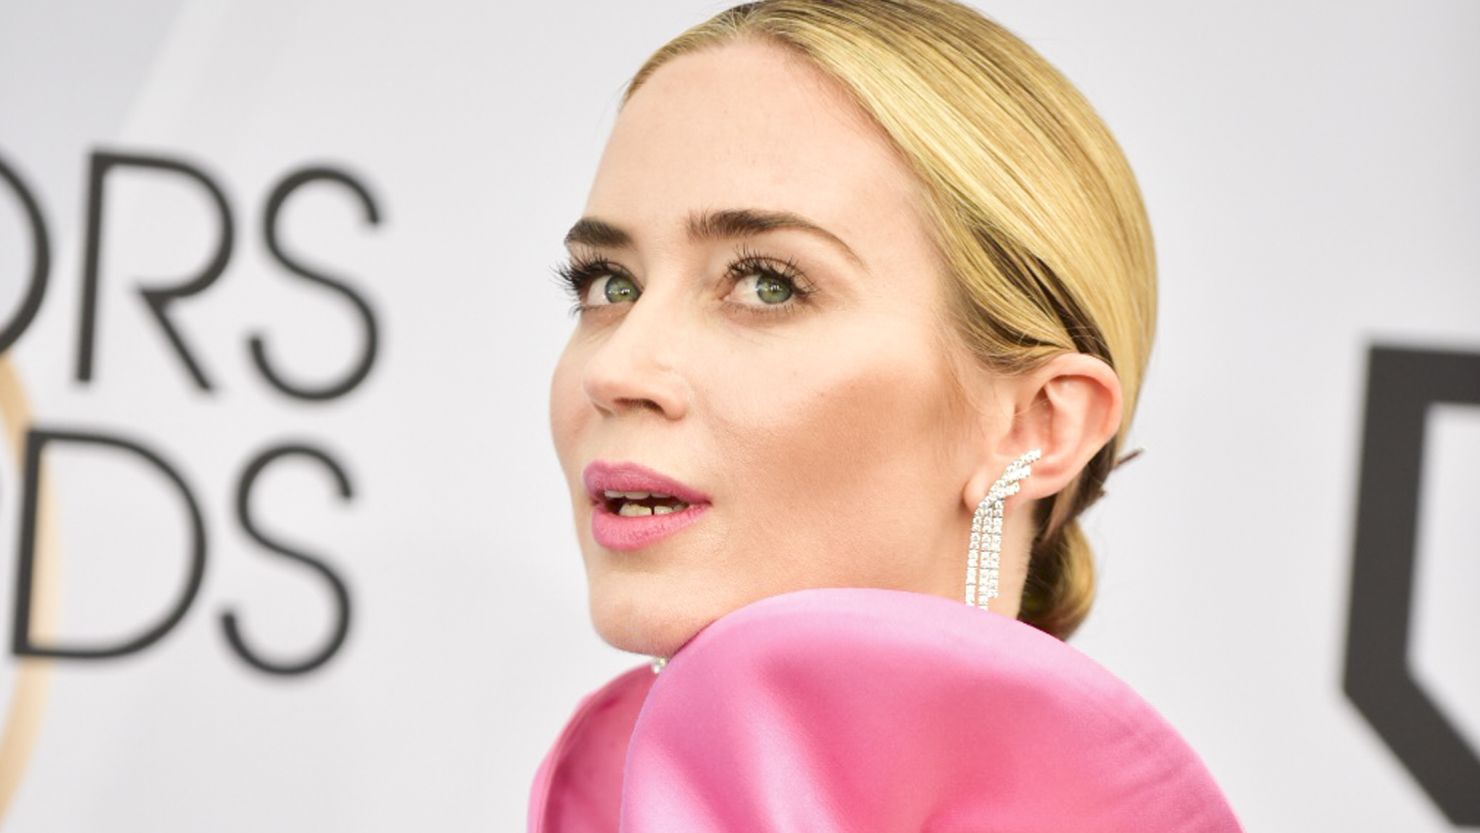 Emily Blunt in Los Angeles, California. (Photo by Rodin Eckenroth/Getty Images)